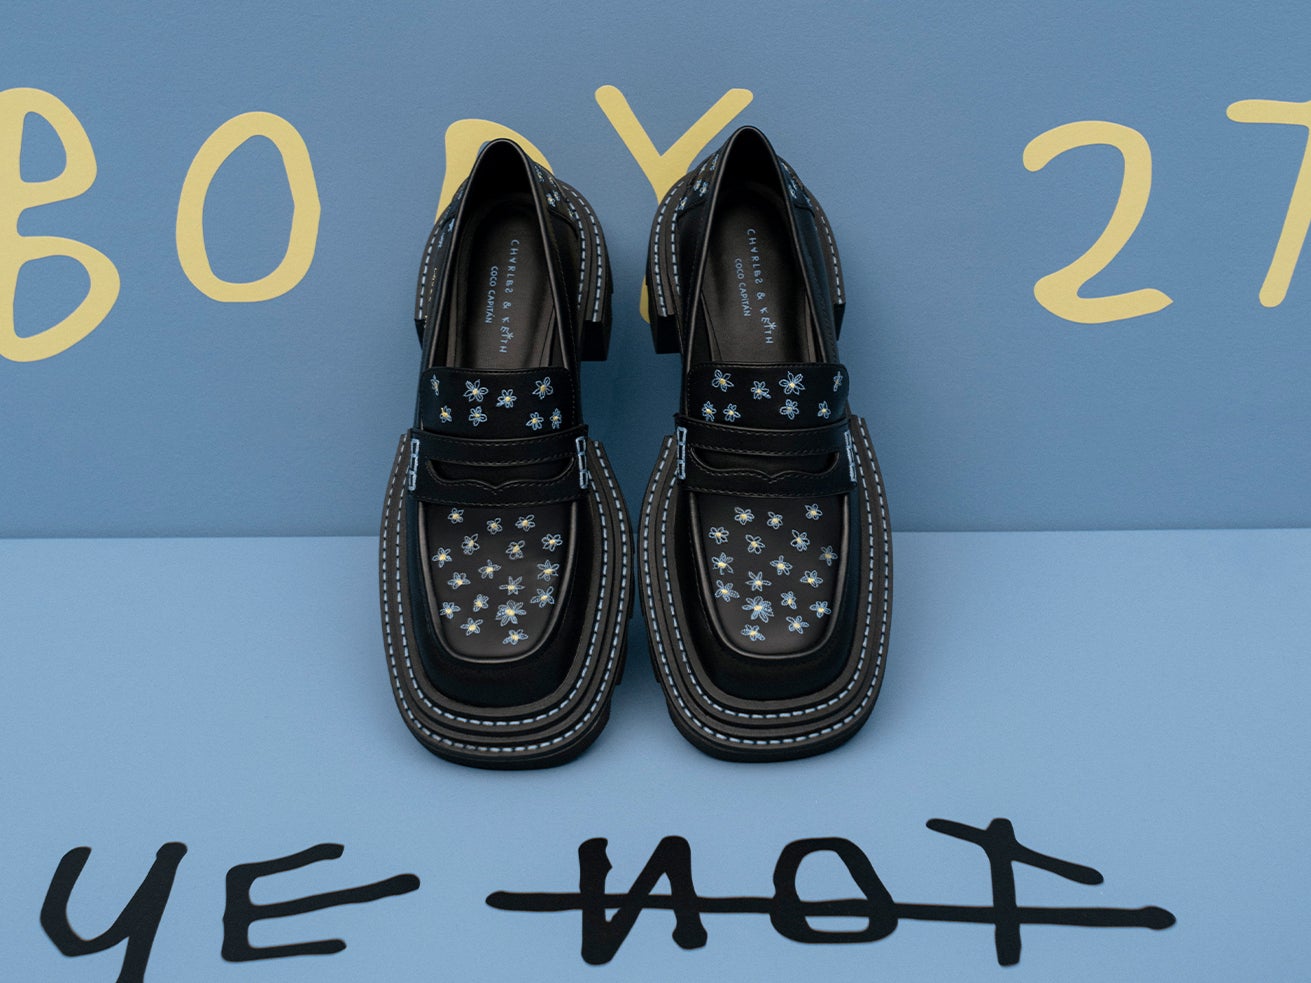 Charles & Keith X Coco Capitan penny loafers